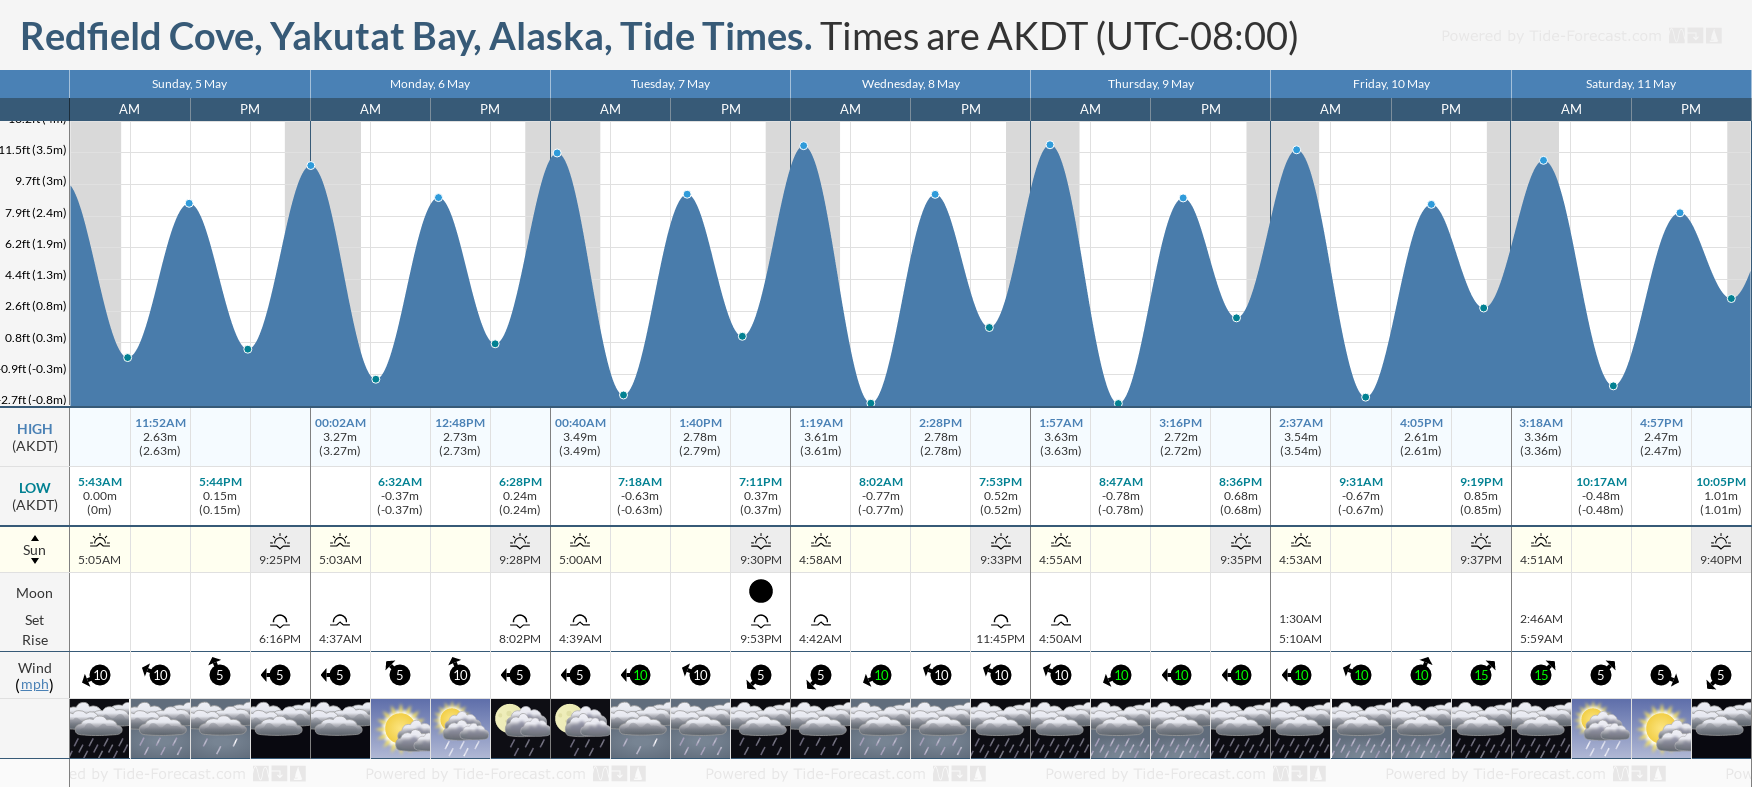 Redfield Cove, Yakutat Bay, Alaska Tide Chart including high and low tide tide times for the next 7 days